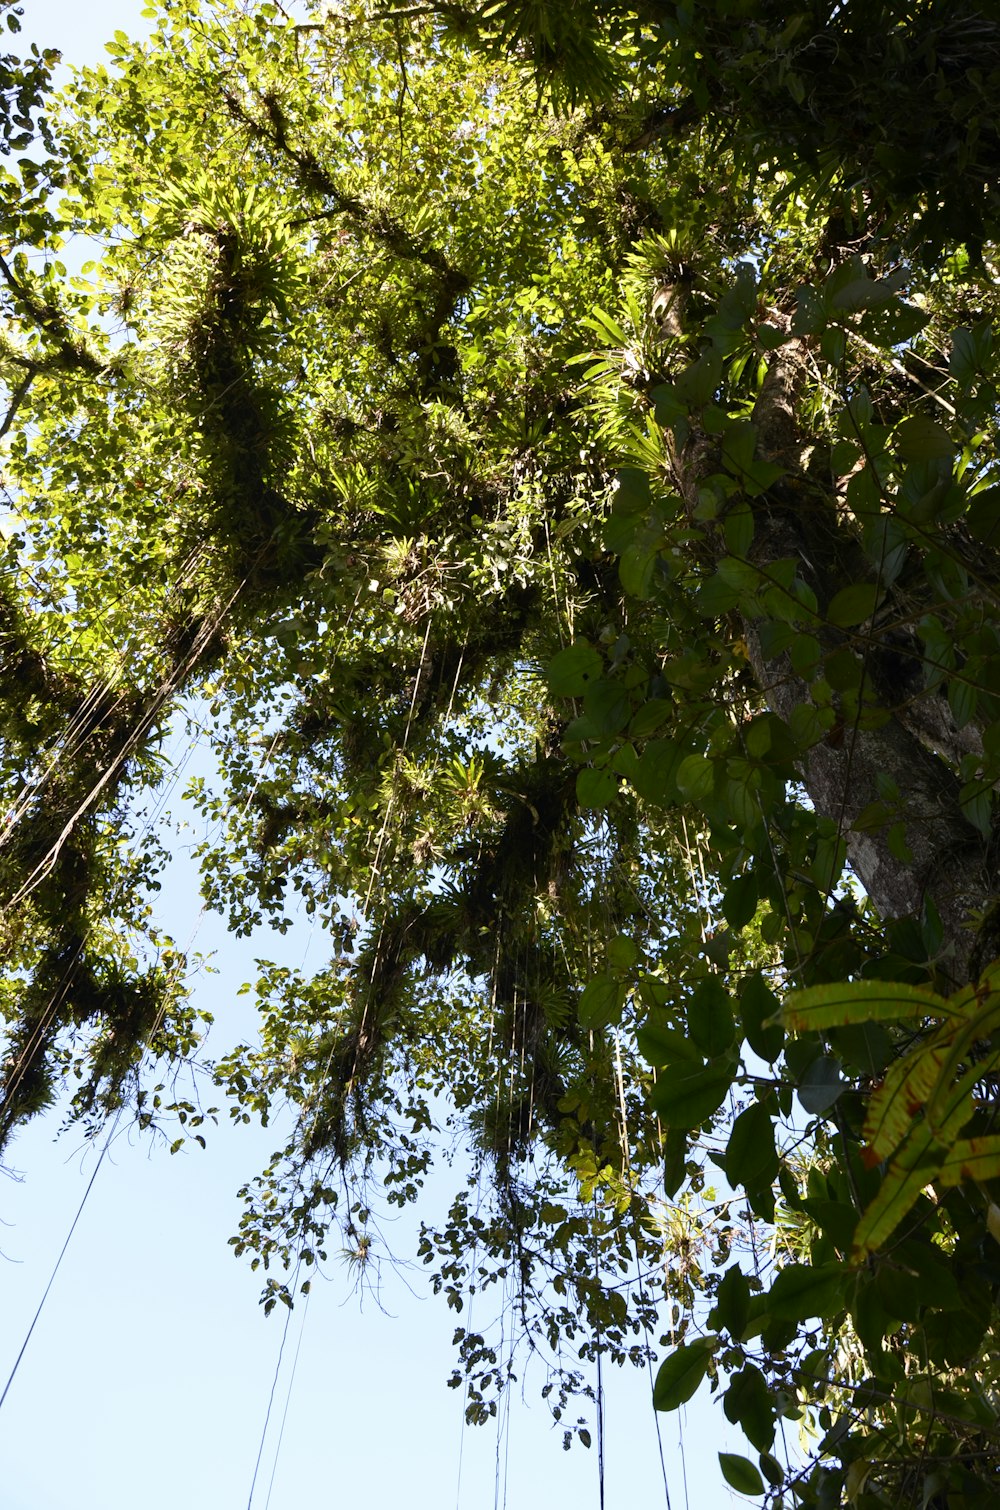 a view of the canopy of a tree from below